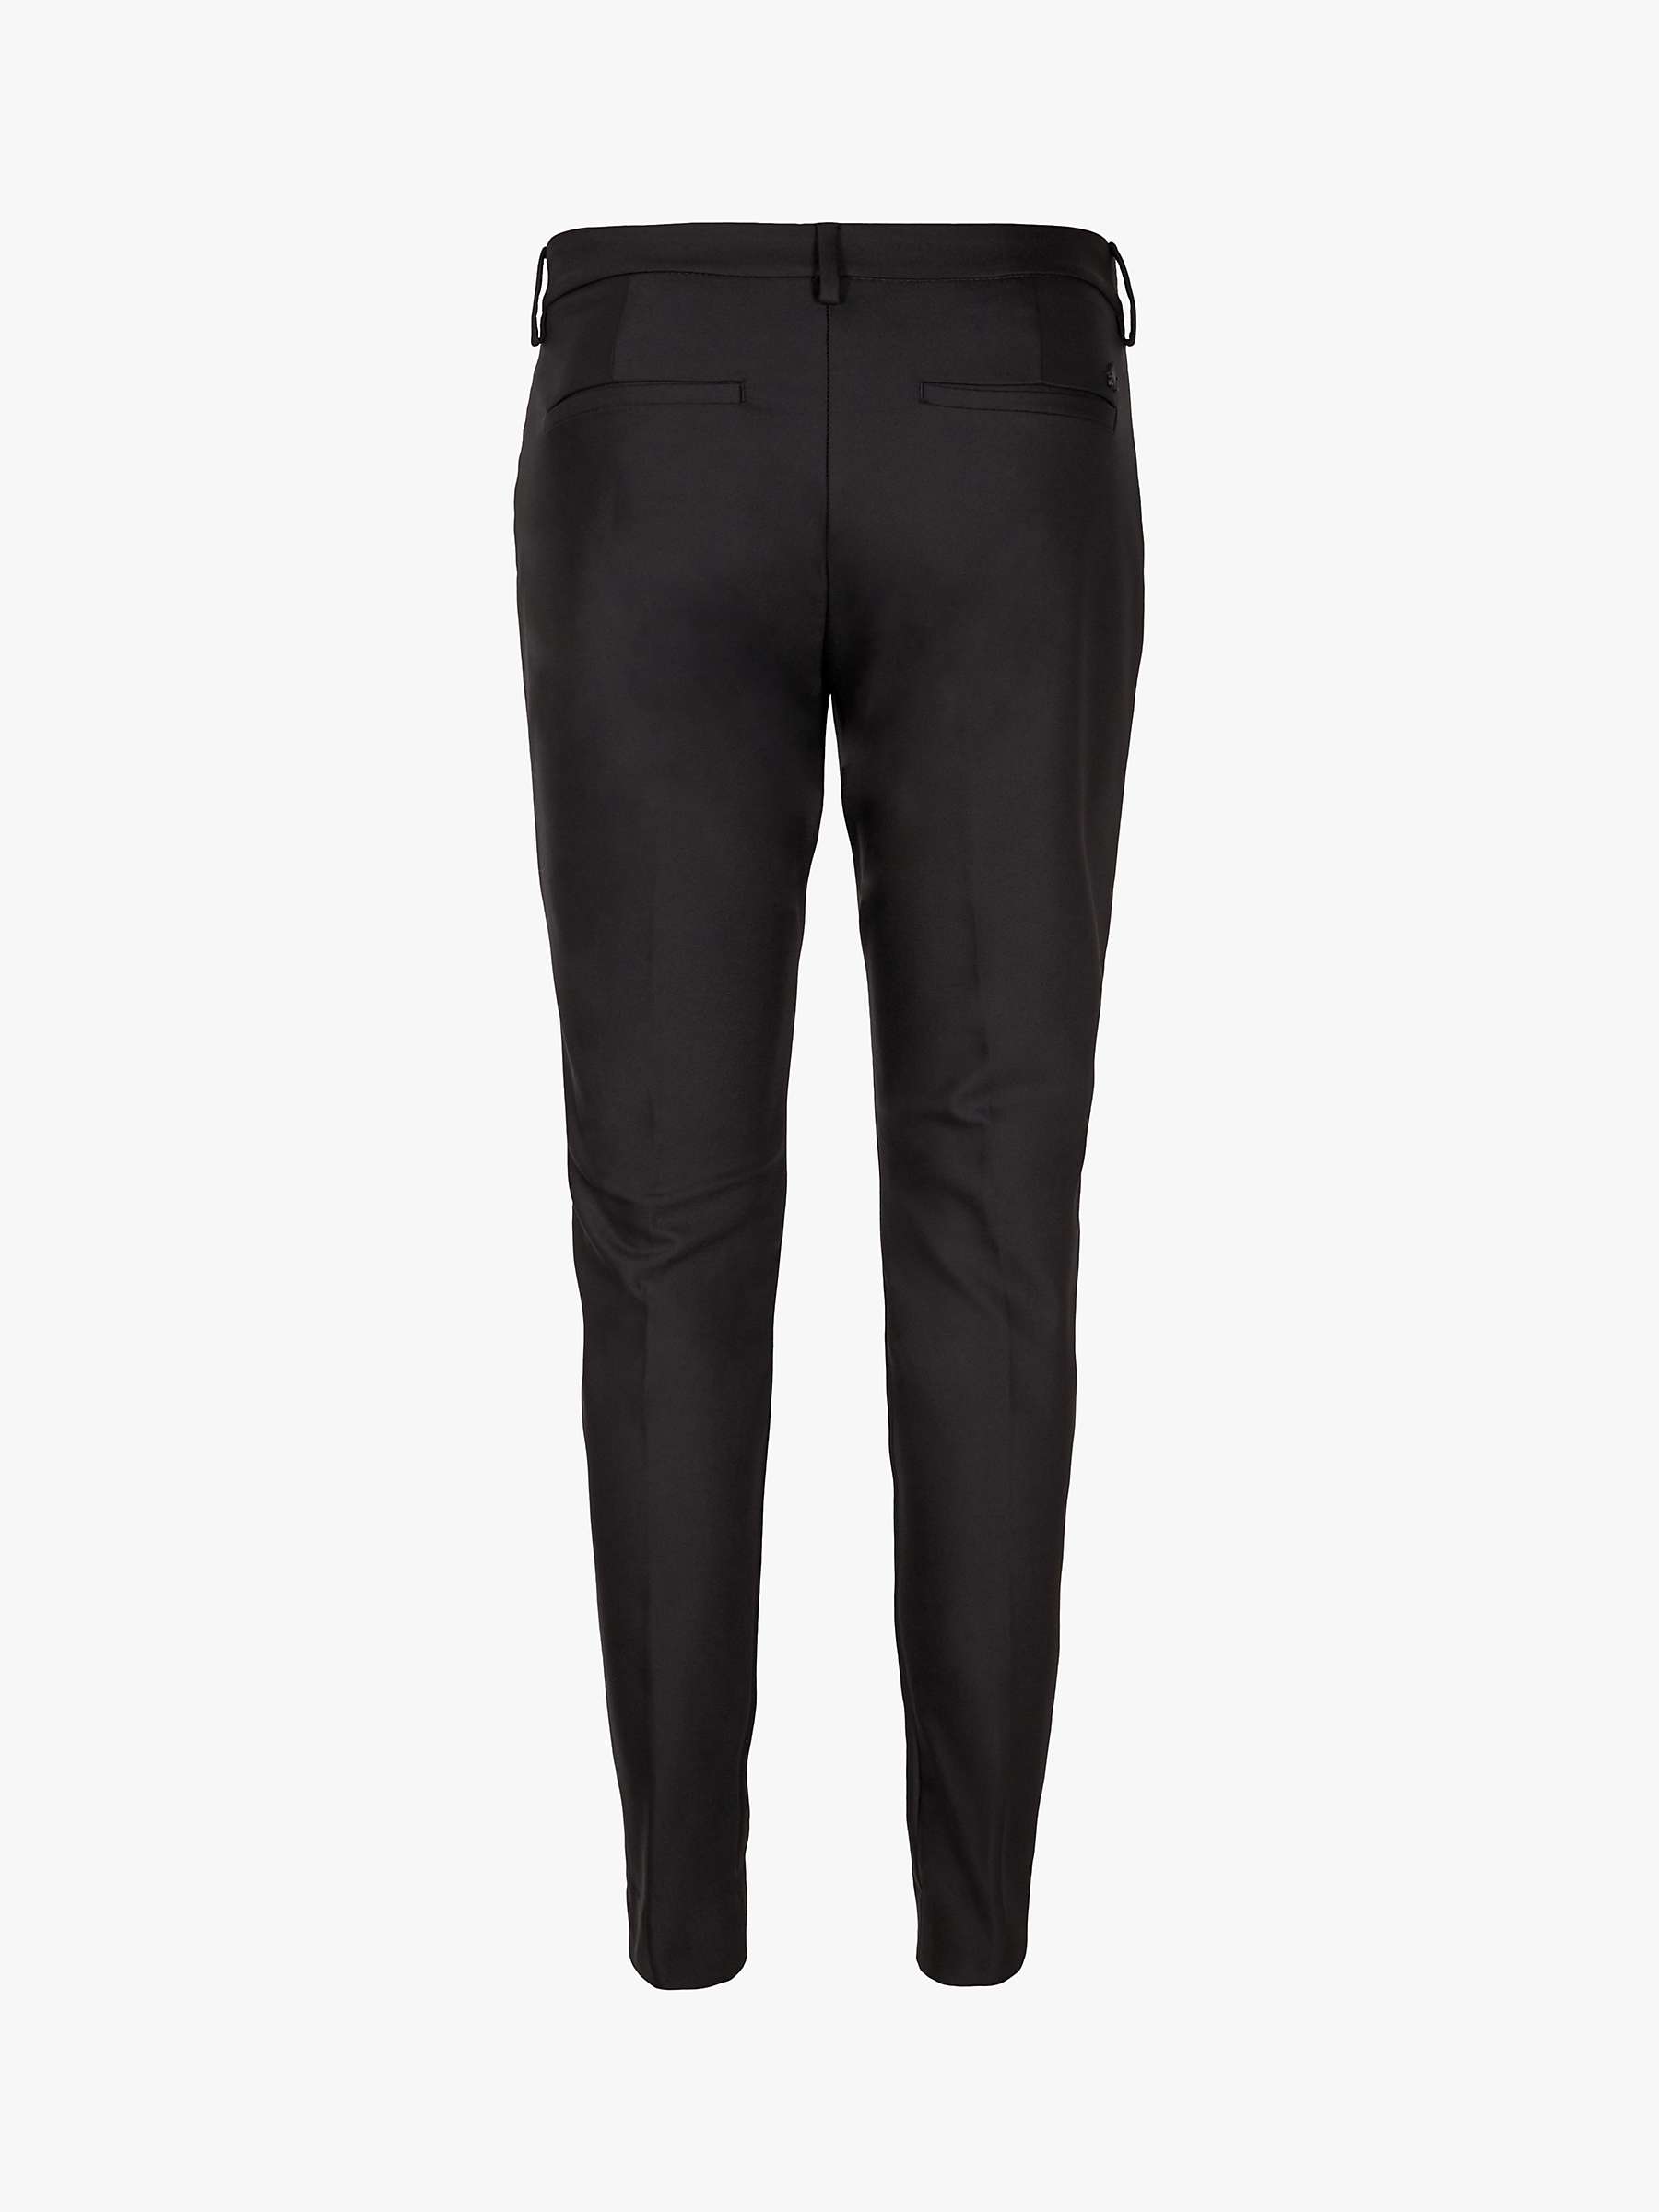 MOS MOSH Abbey Tailored Trousers, Black at John Lewis & Partners